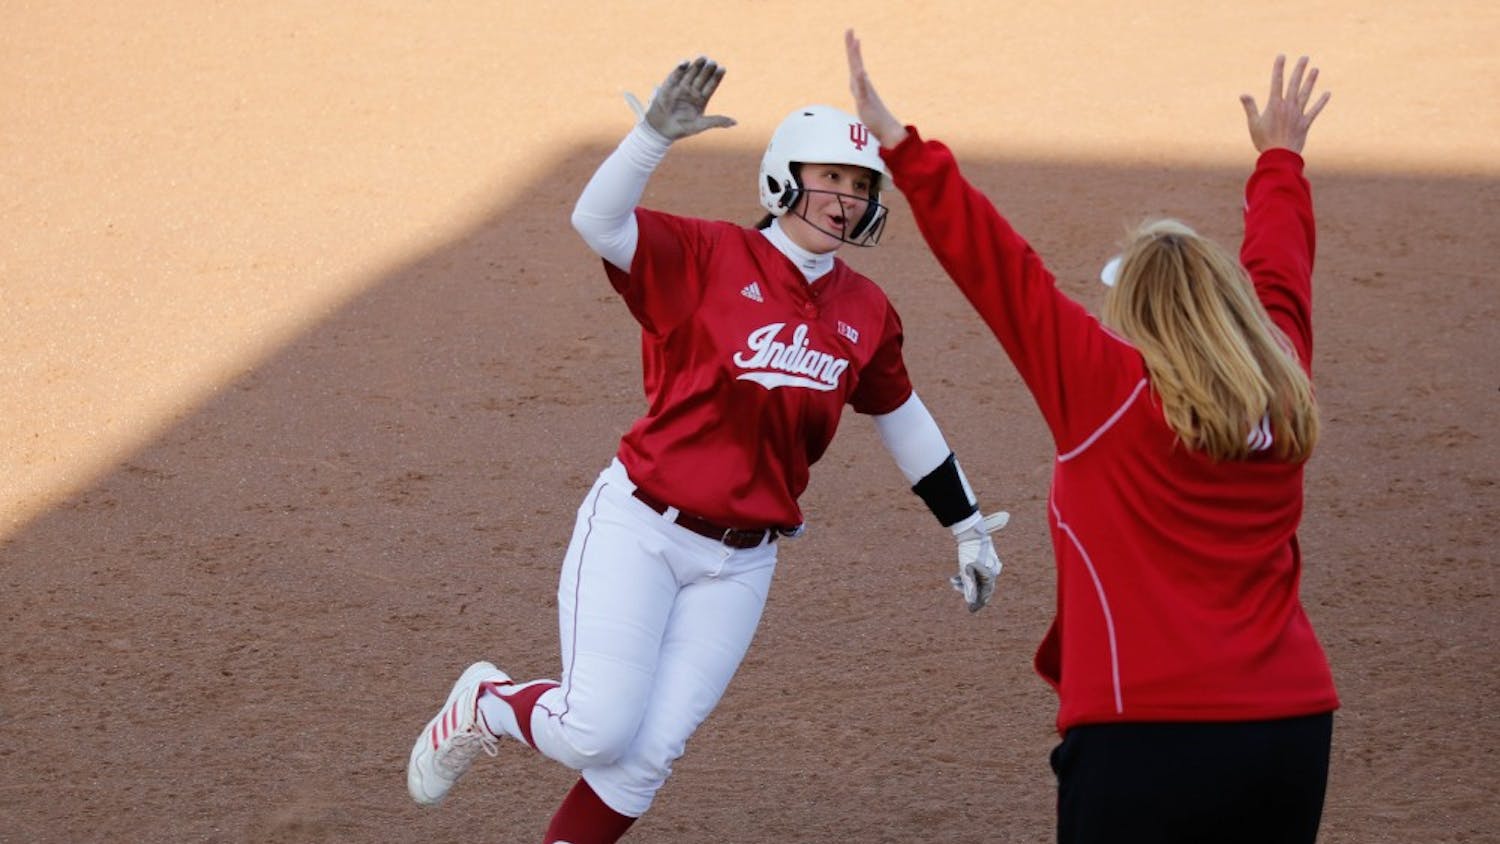 Junior Michelle Huber high-fives her coach, Michelle Gardner, after hitting a home run during IU's first game against Purdue on April 22, 2015 at Andy Mohr Field. Gardner, who resigned as head softball coach in May, was replaced by Shonda Stanton on Saturday.
